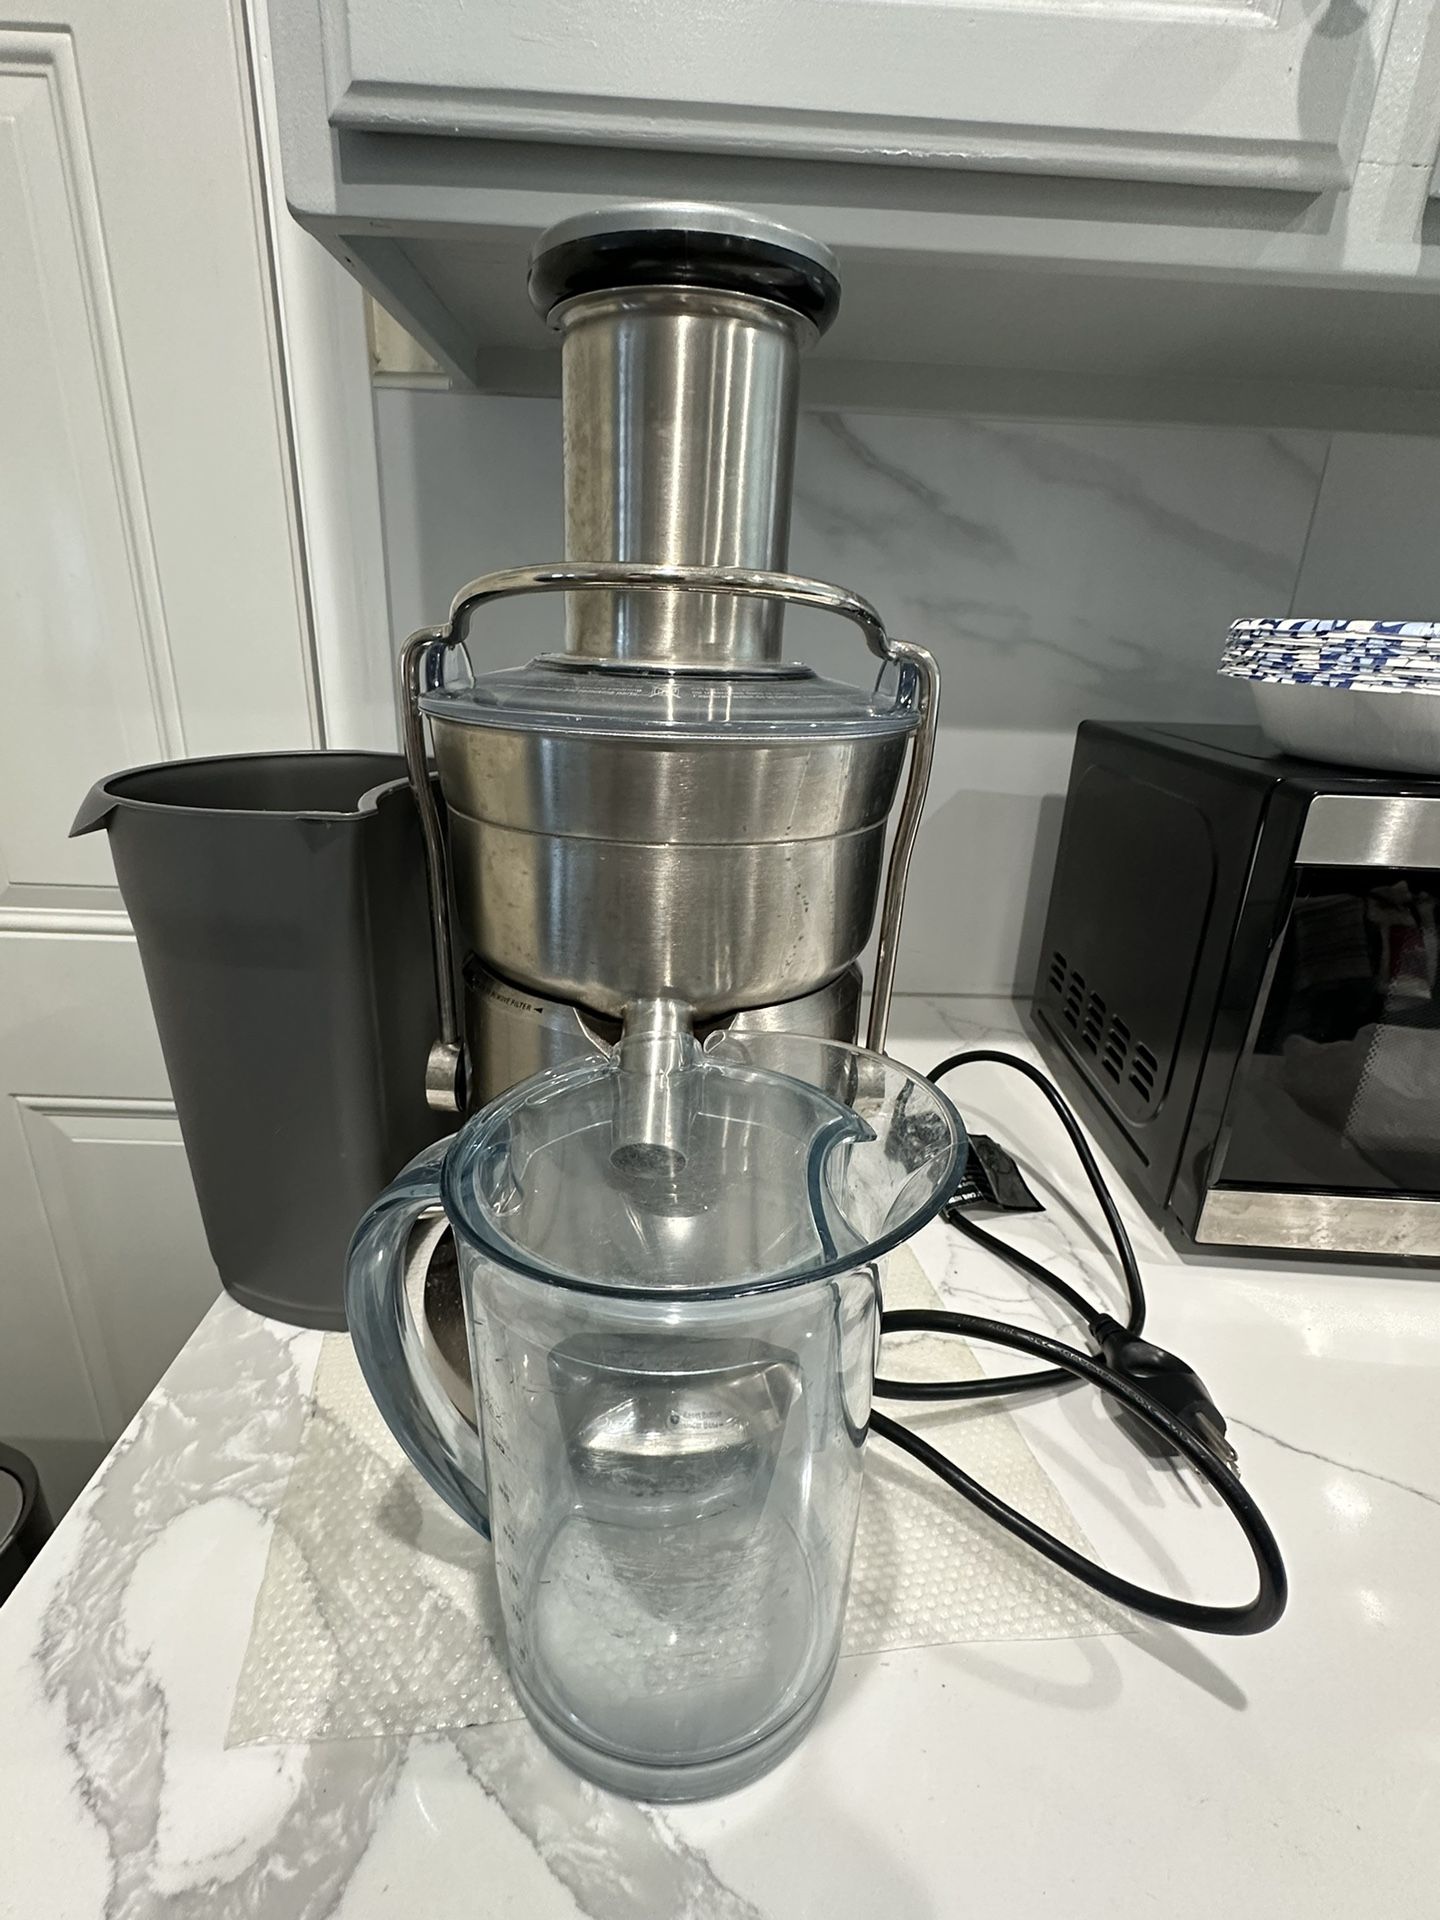 Breville Fountain Juicer